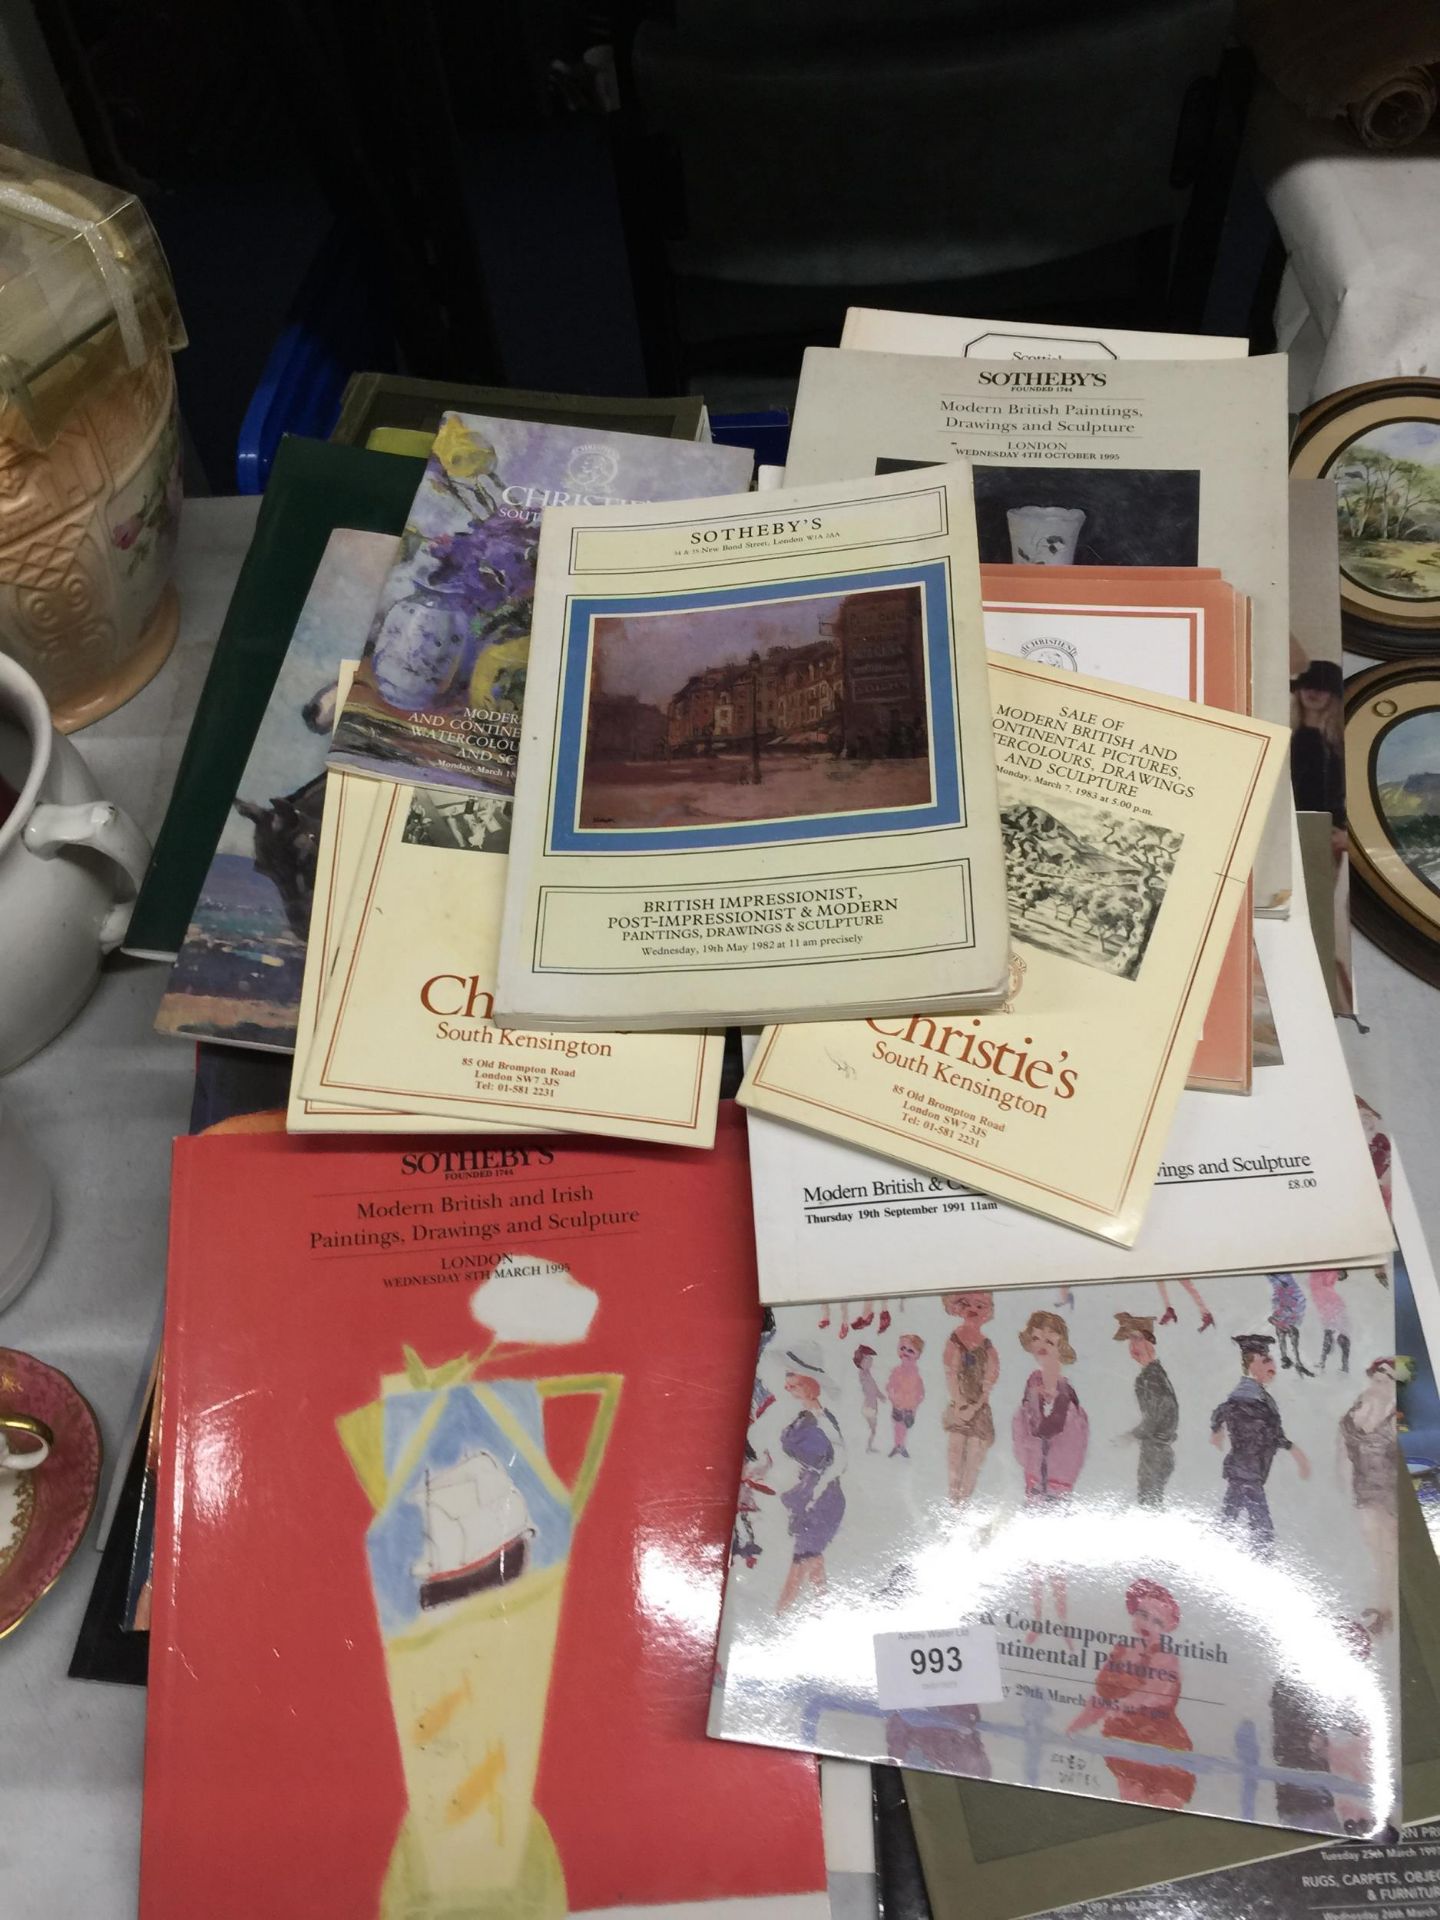 A LARGE AMOUNT OF VINTAGE AUCTION CATALOGUES TO INCLUDE CHRISTIES, SOTHEBY'S, ETC